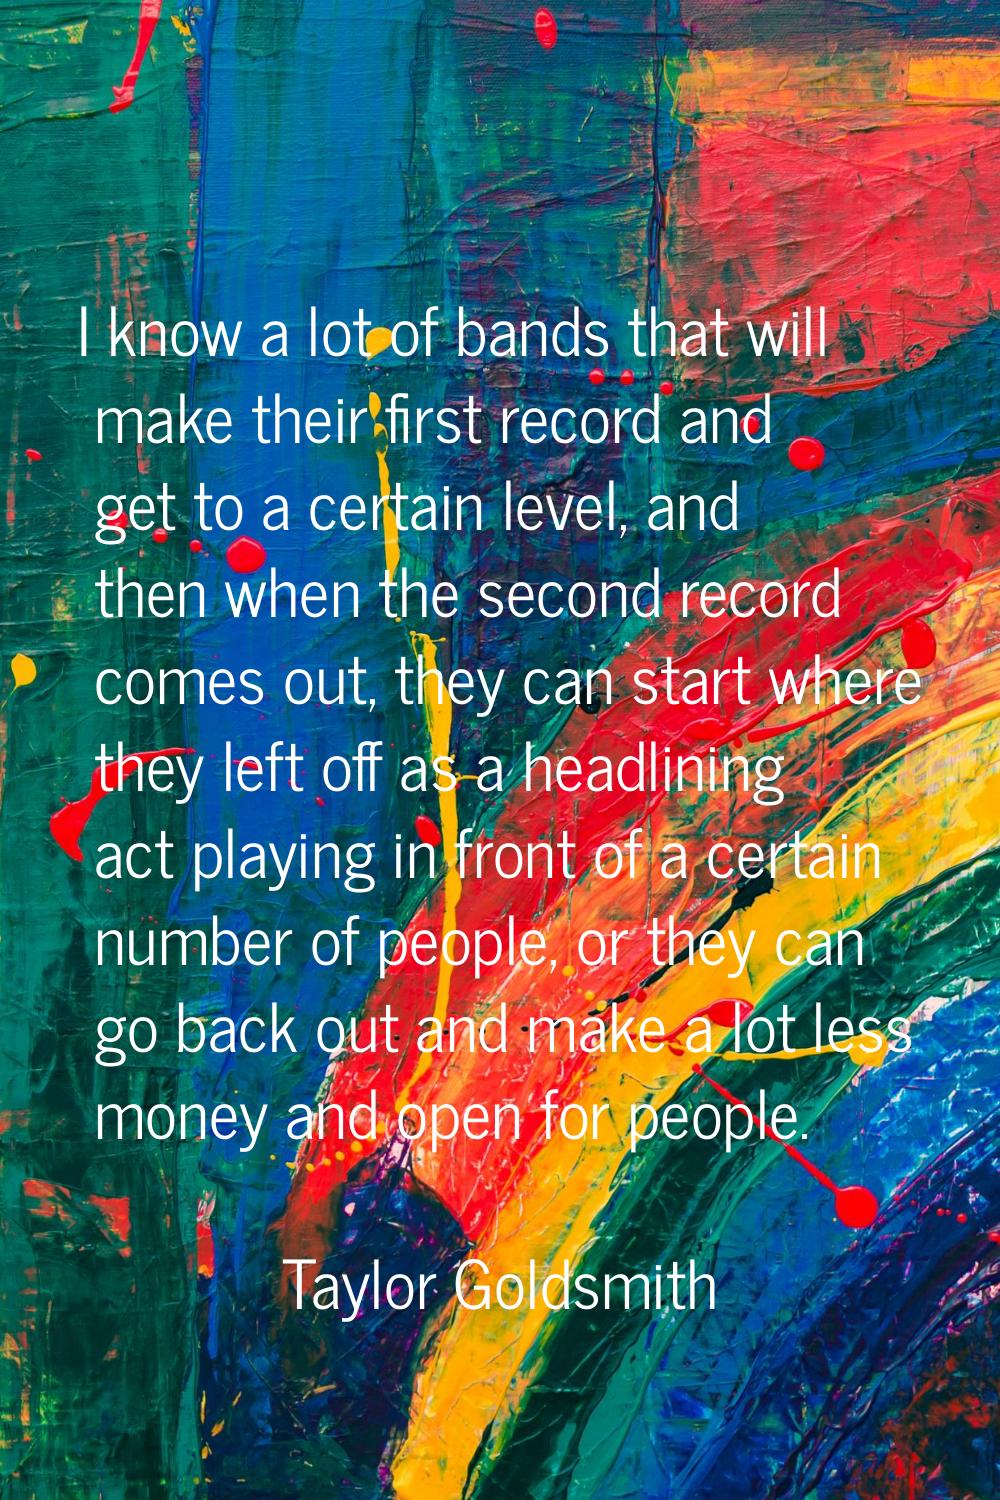 I know a lot of bands that will make their first record and get to a certain level, and then when t